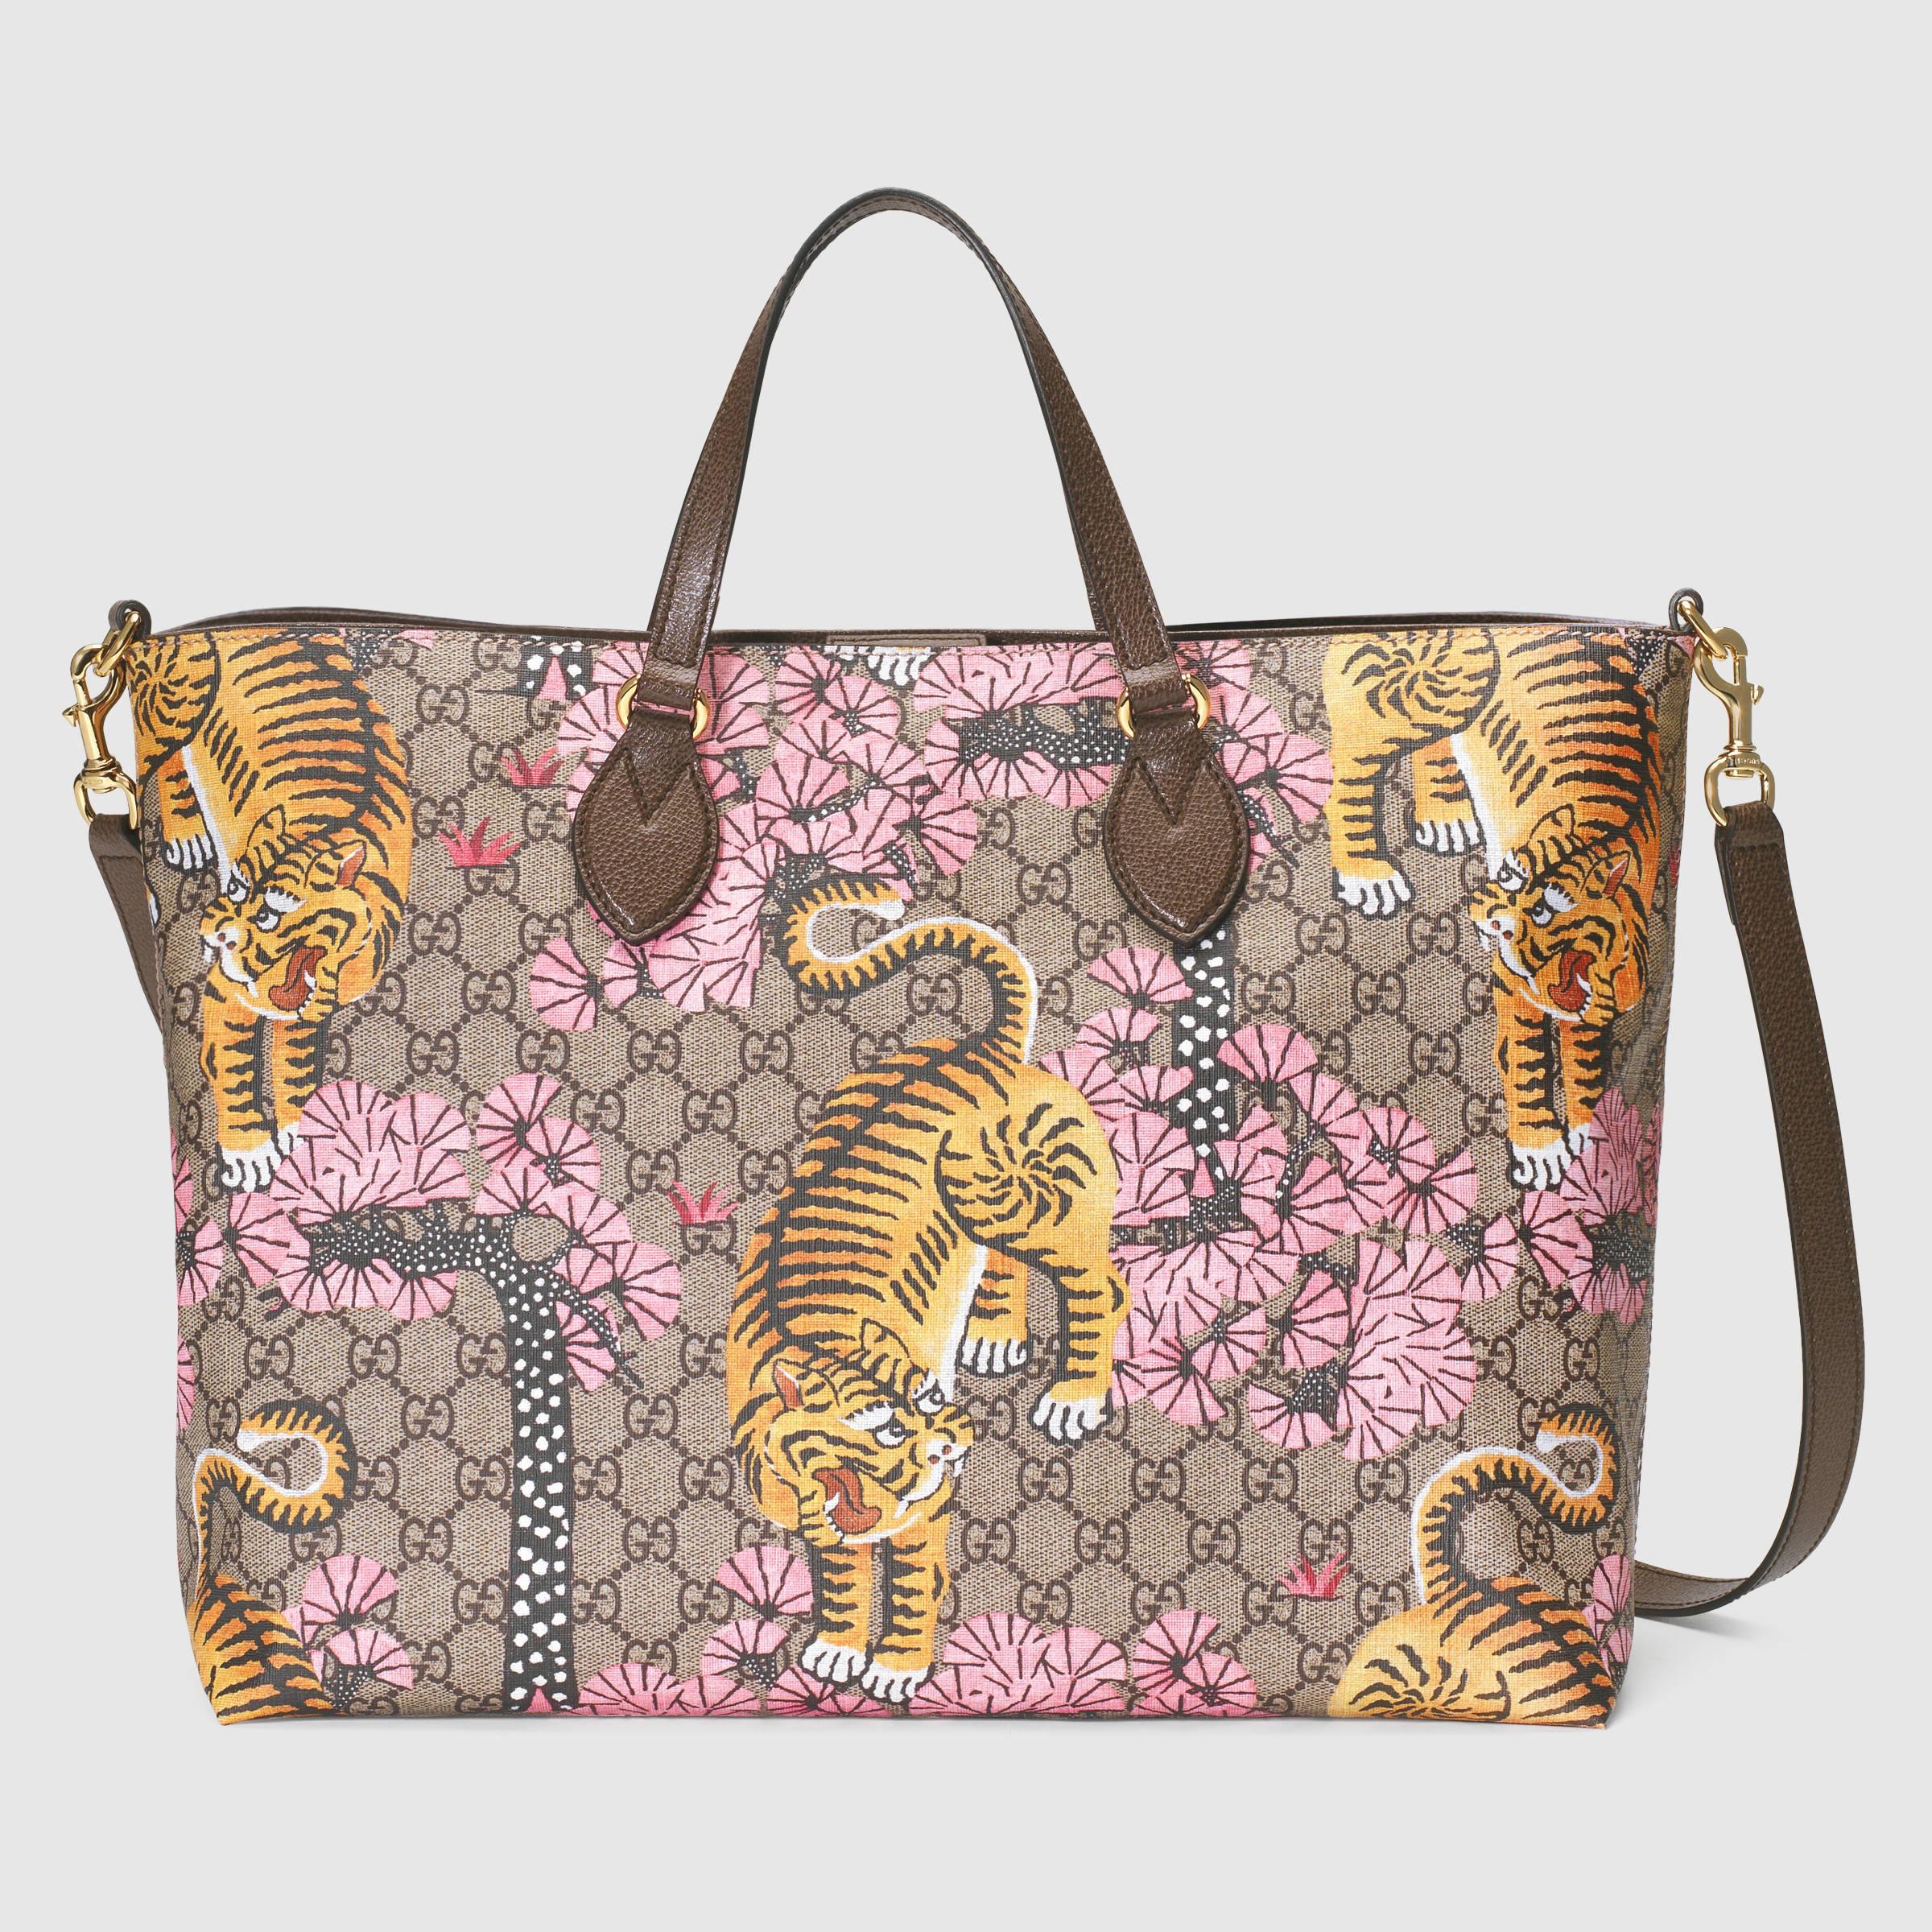 Lyst - Gucci Bengal Soft Gg Tote